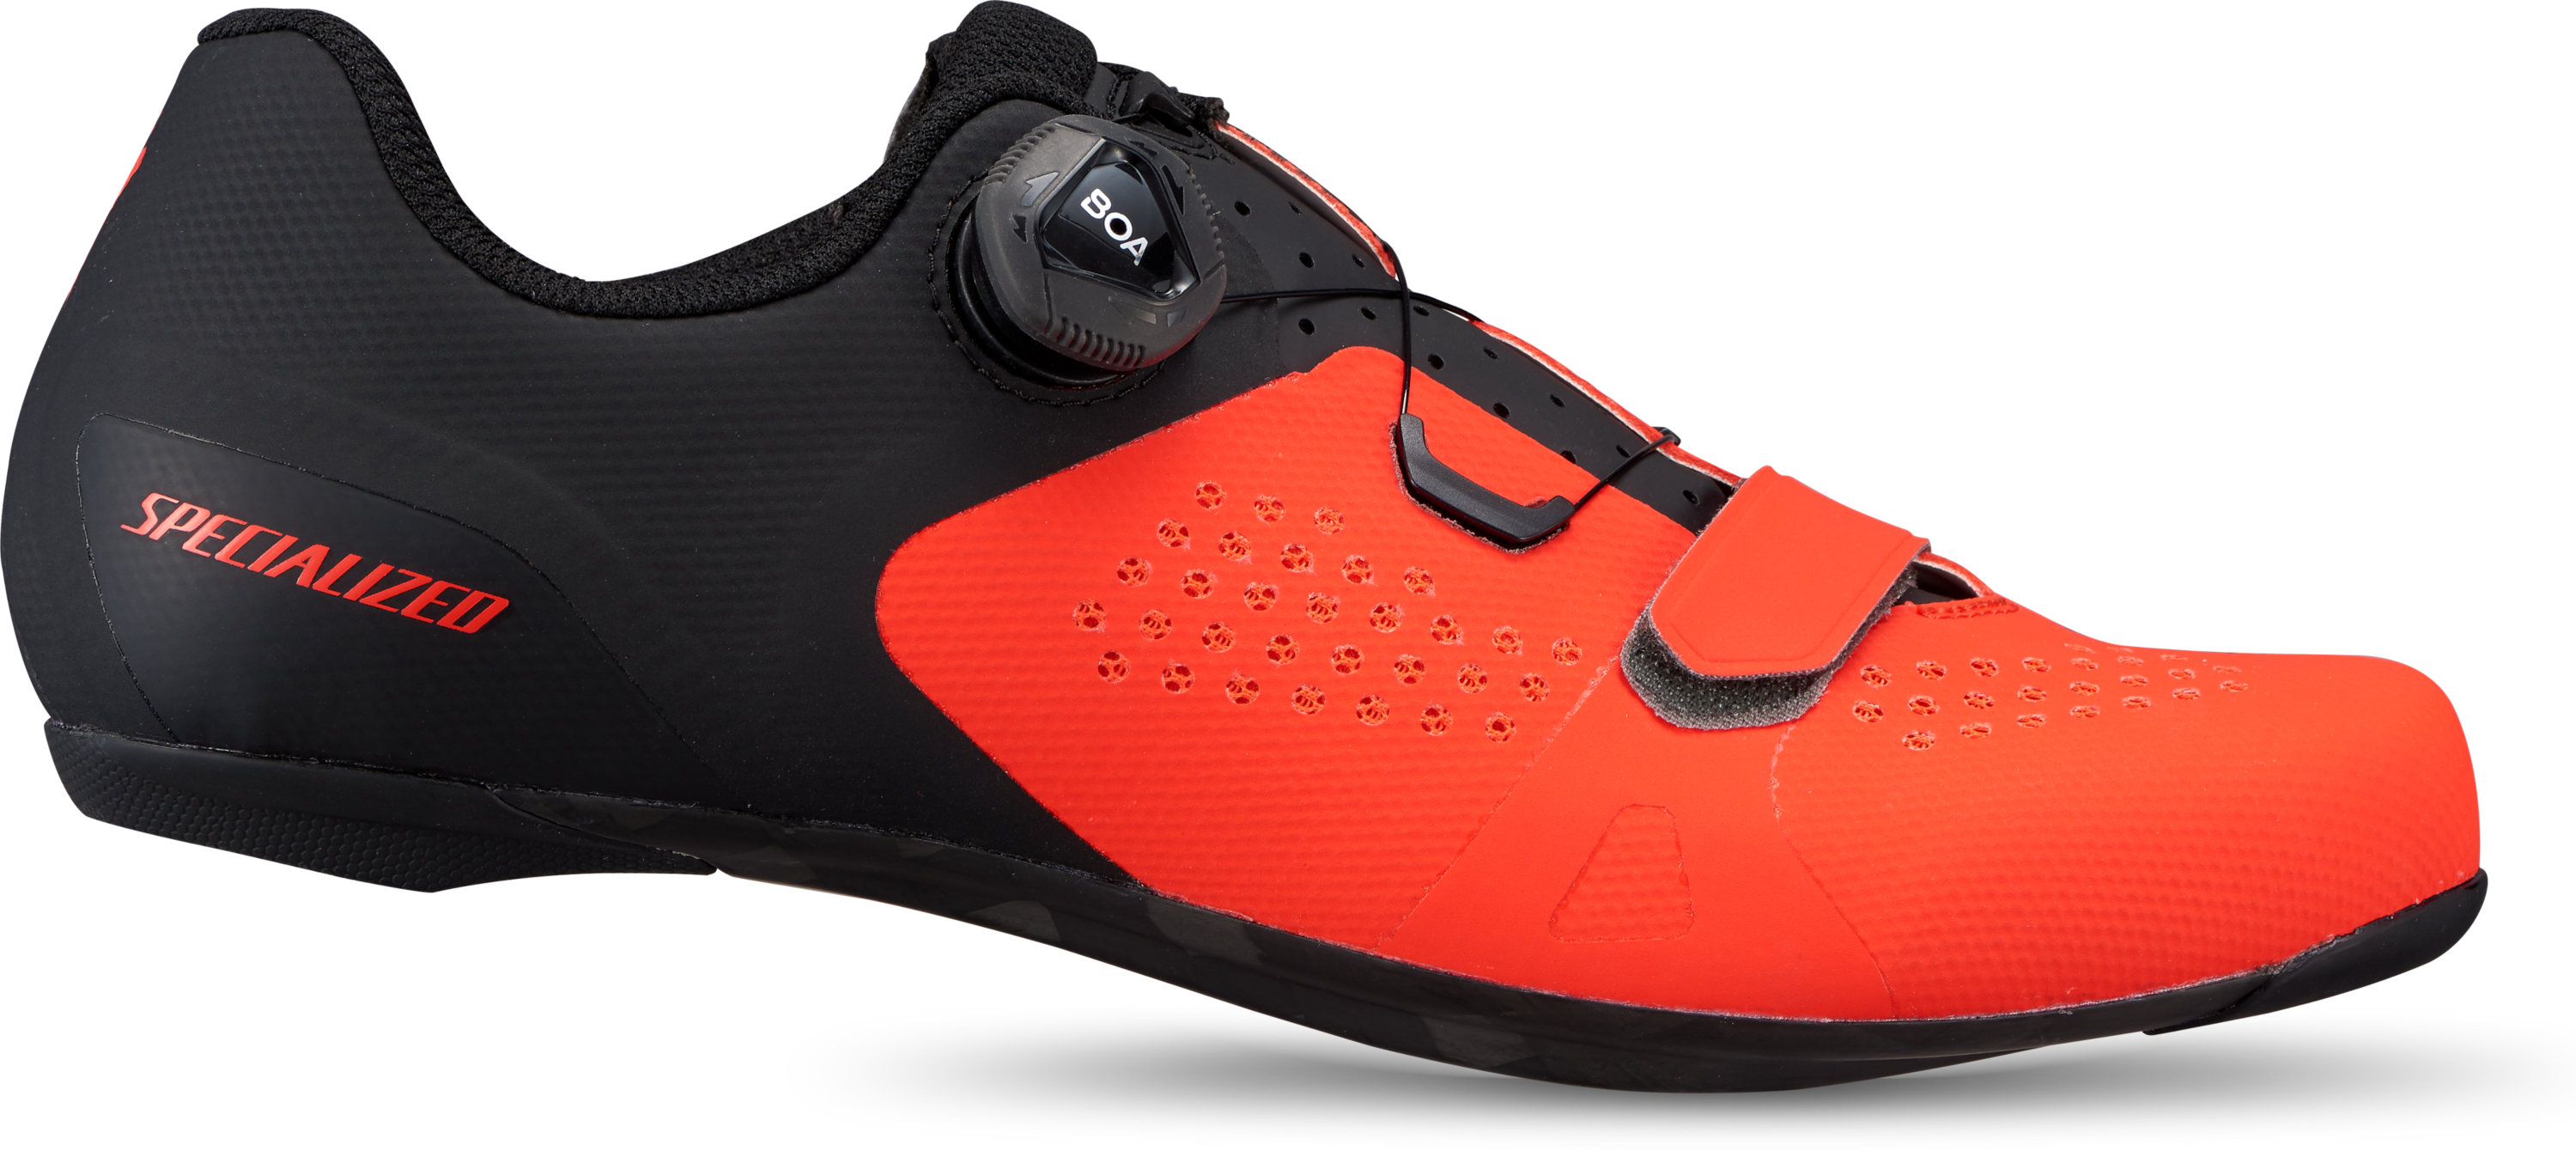 Torch 2.0 Road Shoes (Rocket Red/Black) - SHOES - TheFlow.bike